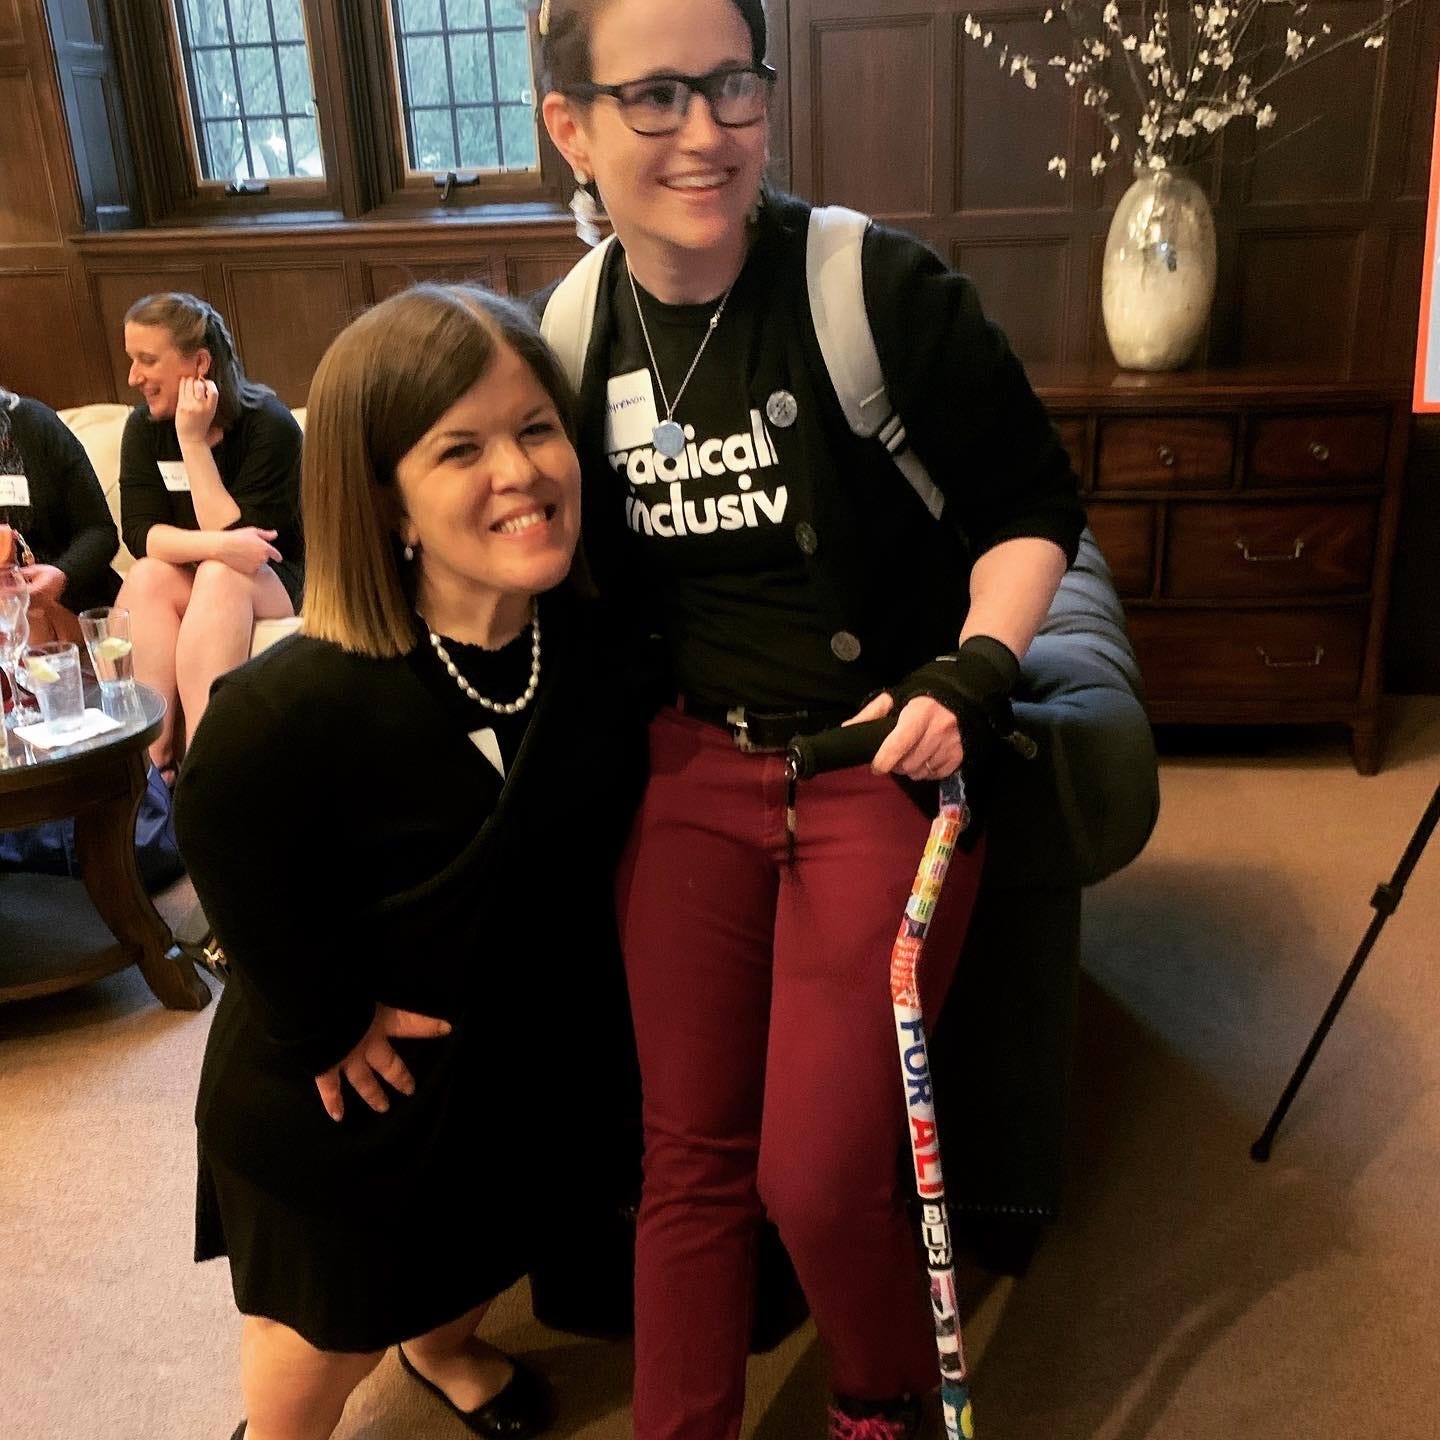 Two white women smiling. Woman 1 is a little person woman 2 is the author, brown hair, glasses,and cane. Her shirt says "radically inclusive"